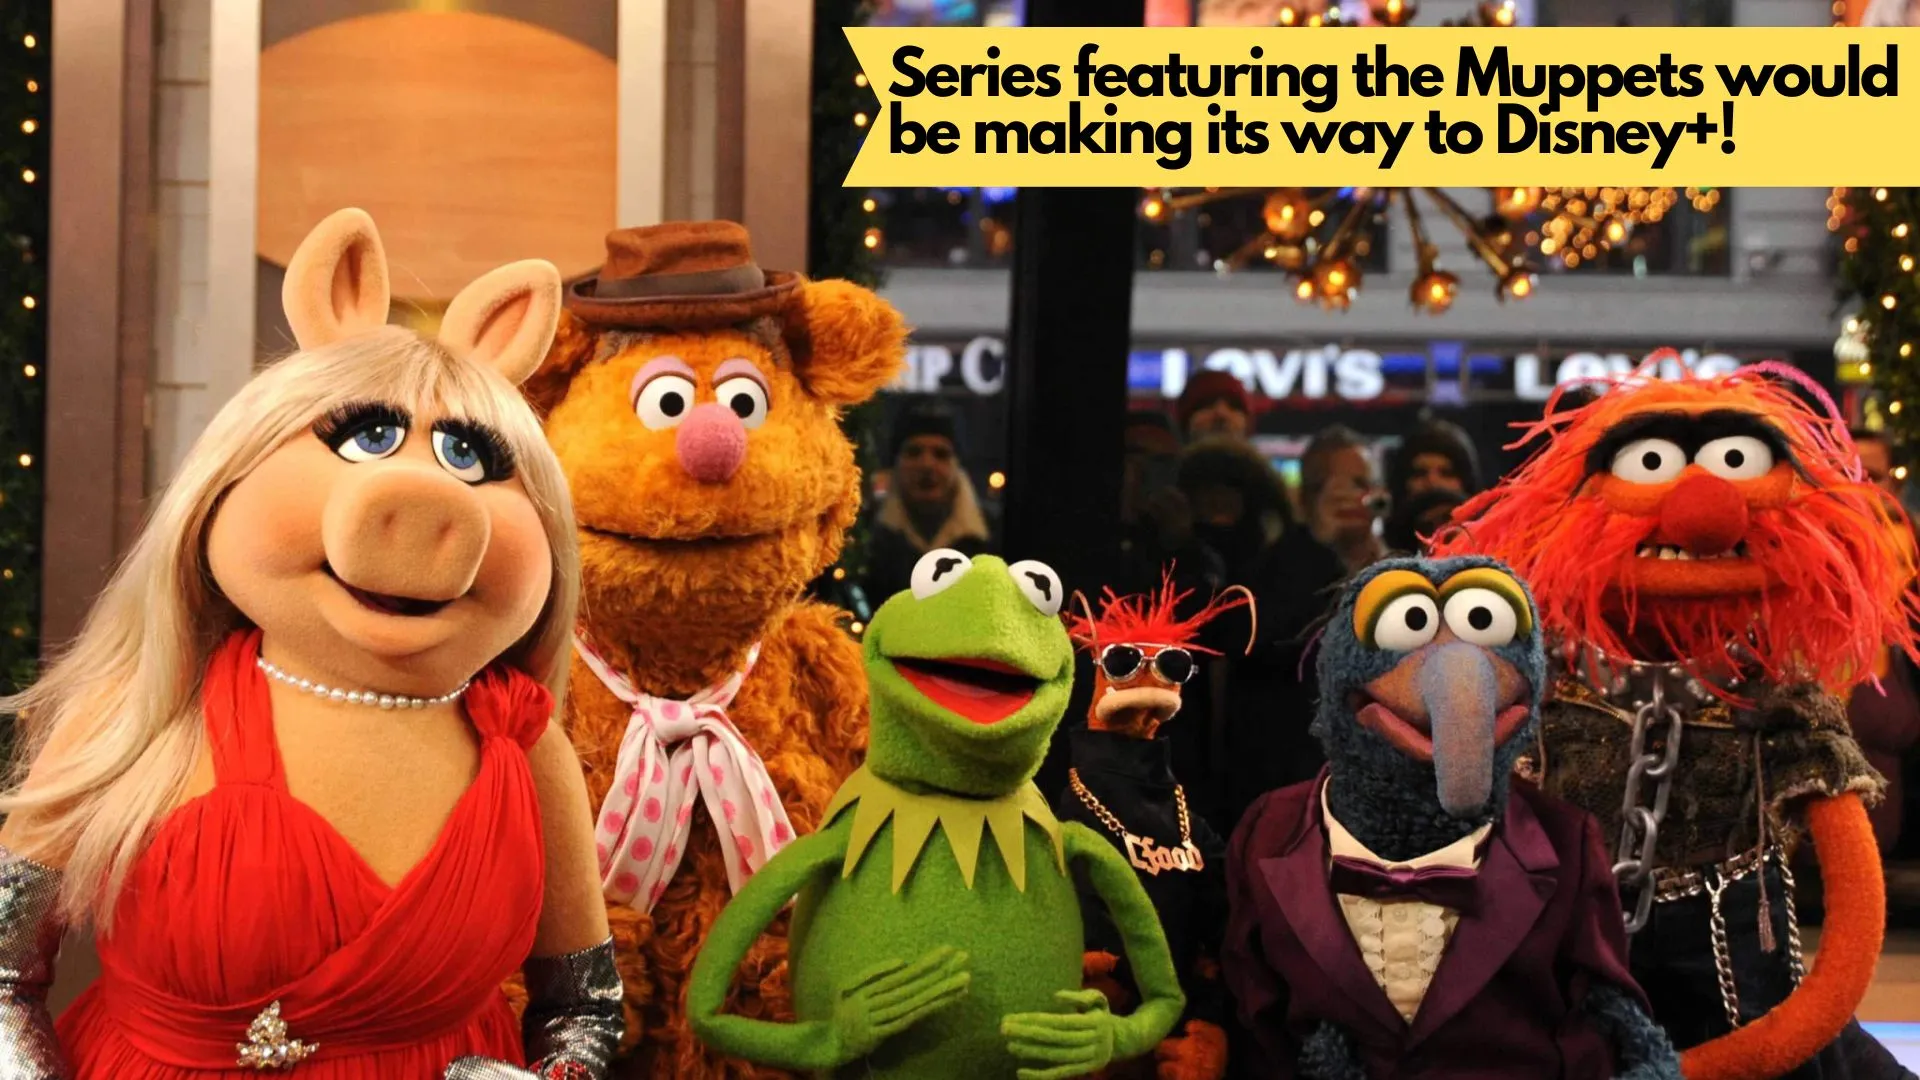 Series featuring the Muppets would be making its way to Disney+! (Image credit: toughpigs)